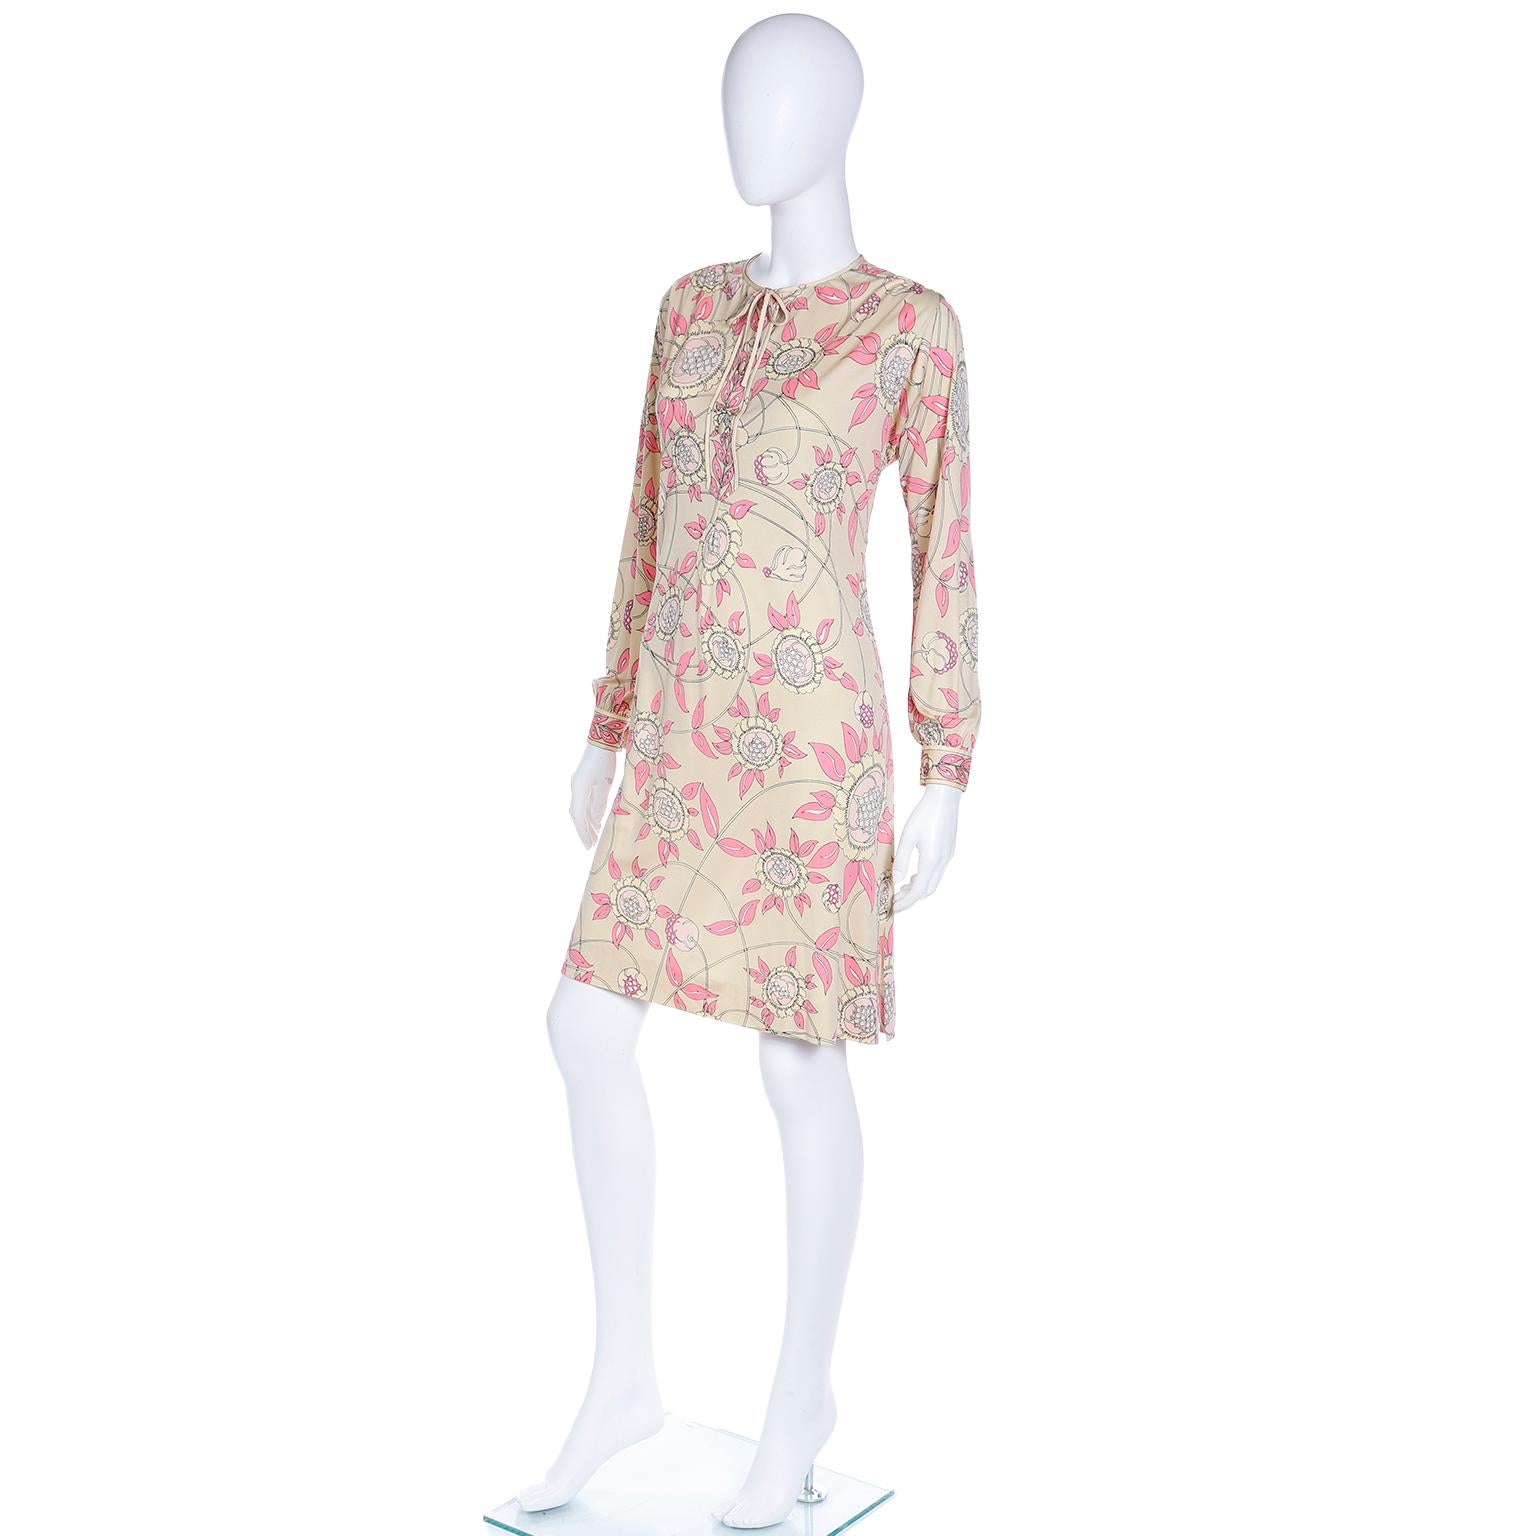 1970s Vintage Emilio Pucci Silk Jersey Pale Yellow & Pink Floral Dress For Sale 1